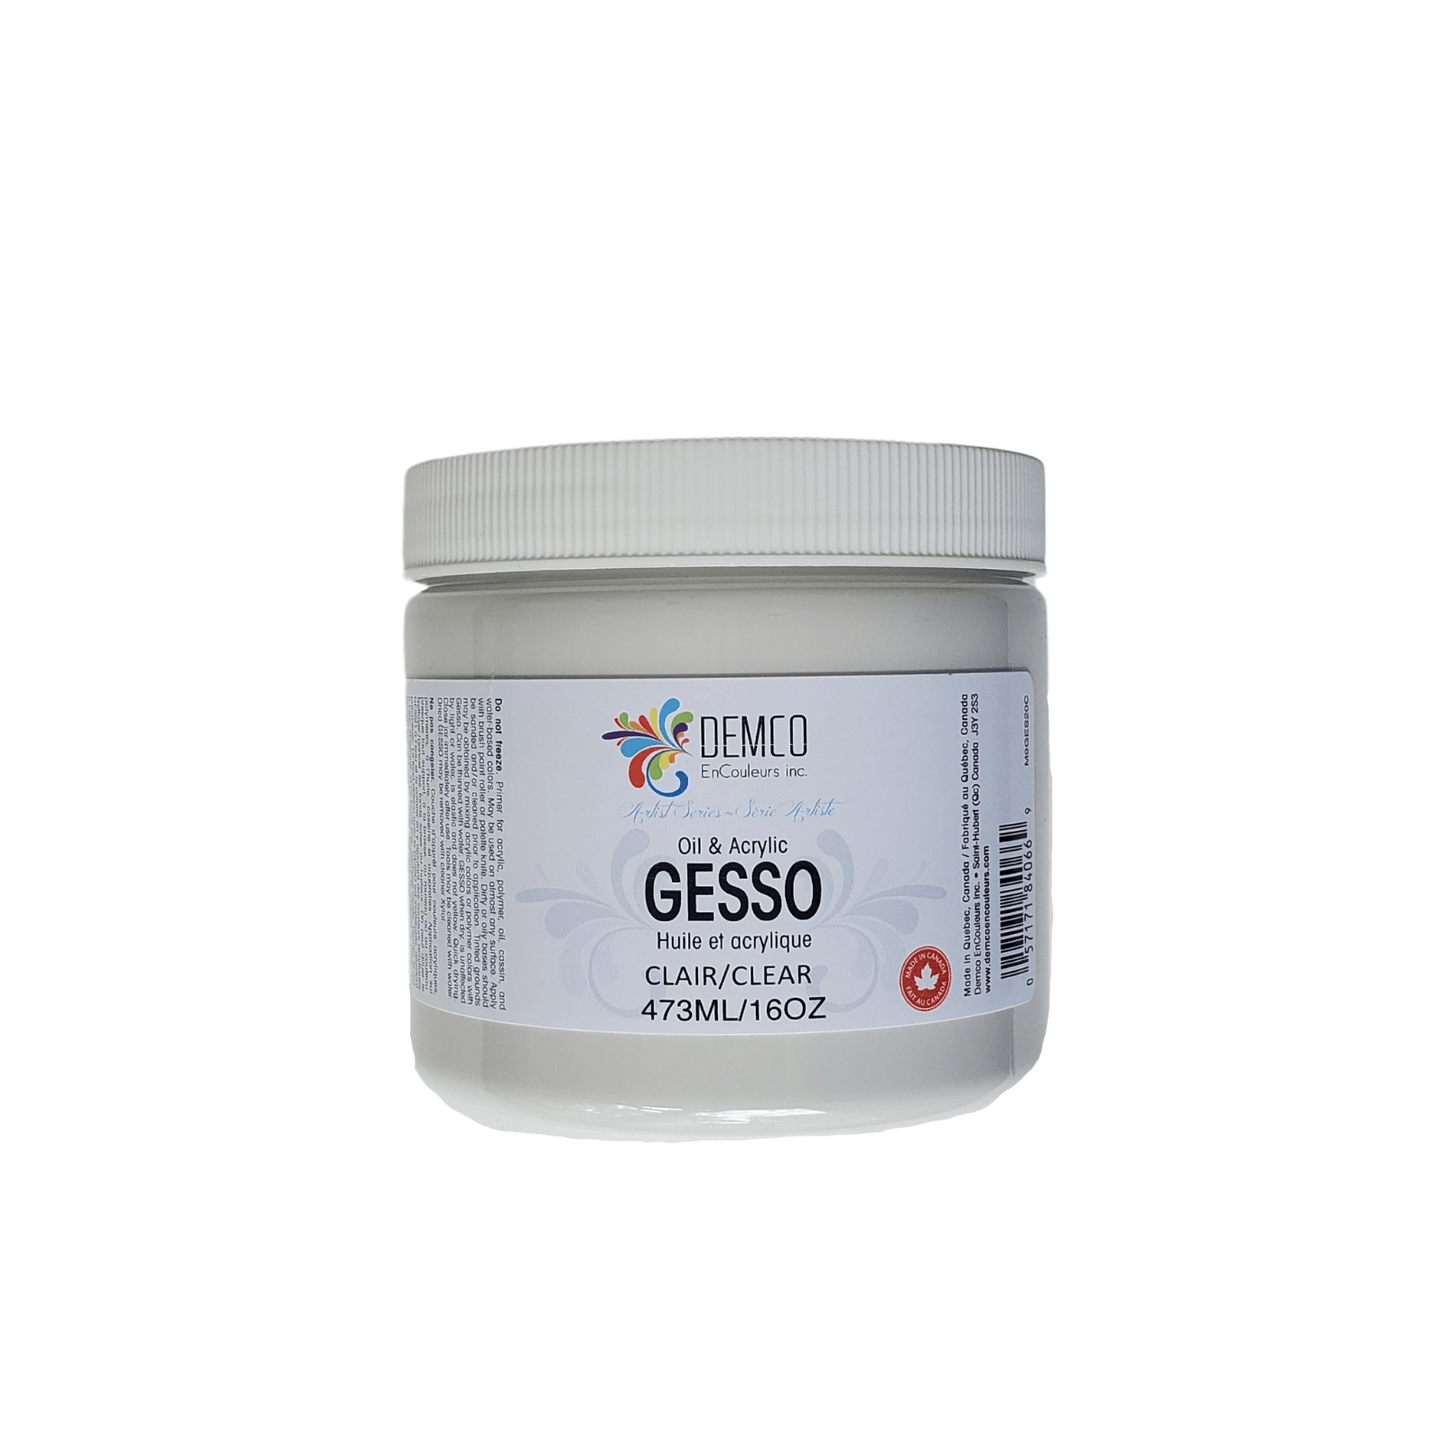 DEMCO Clear Gesso Demco - Clear Gesso - 473mL Jar - Item #M9GES20C